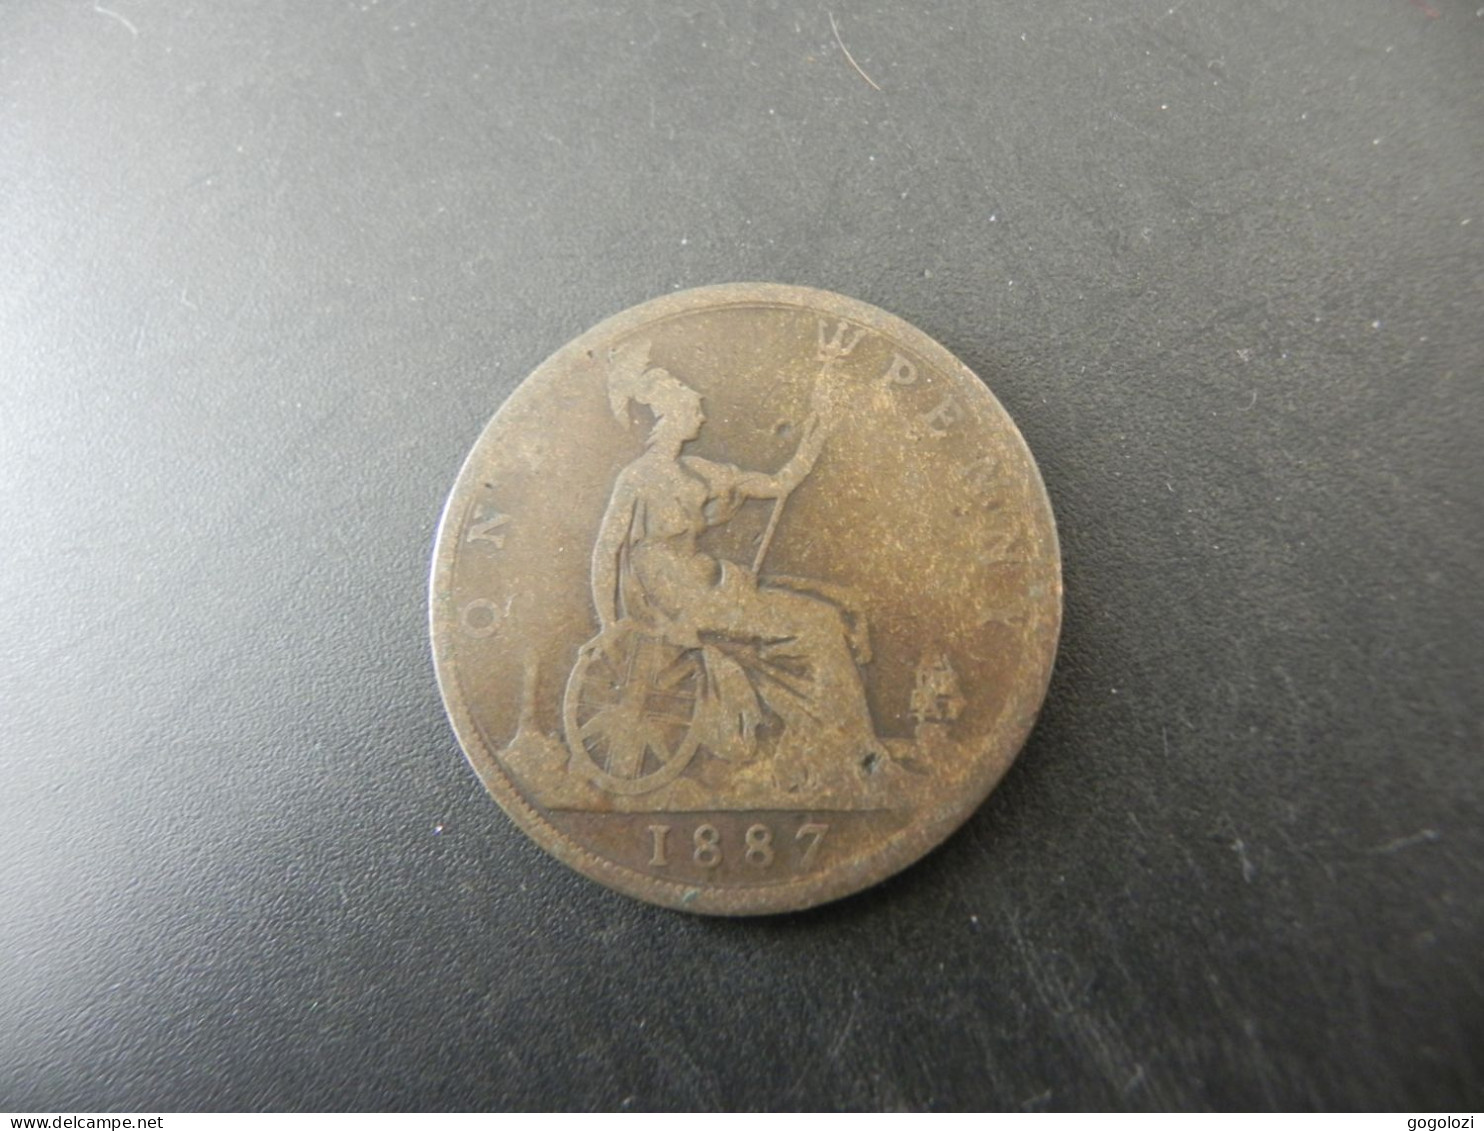 Great Britain 1 Penny 1887 - D. 1 Penny